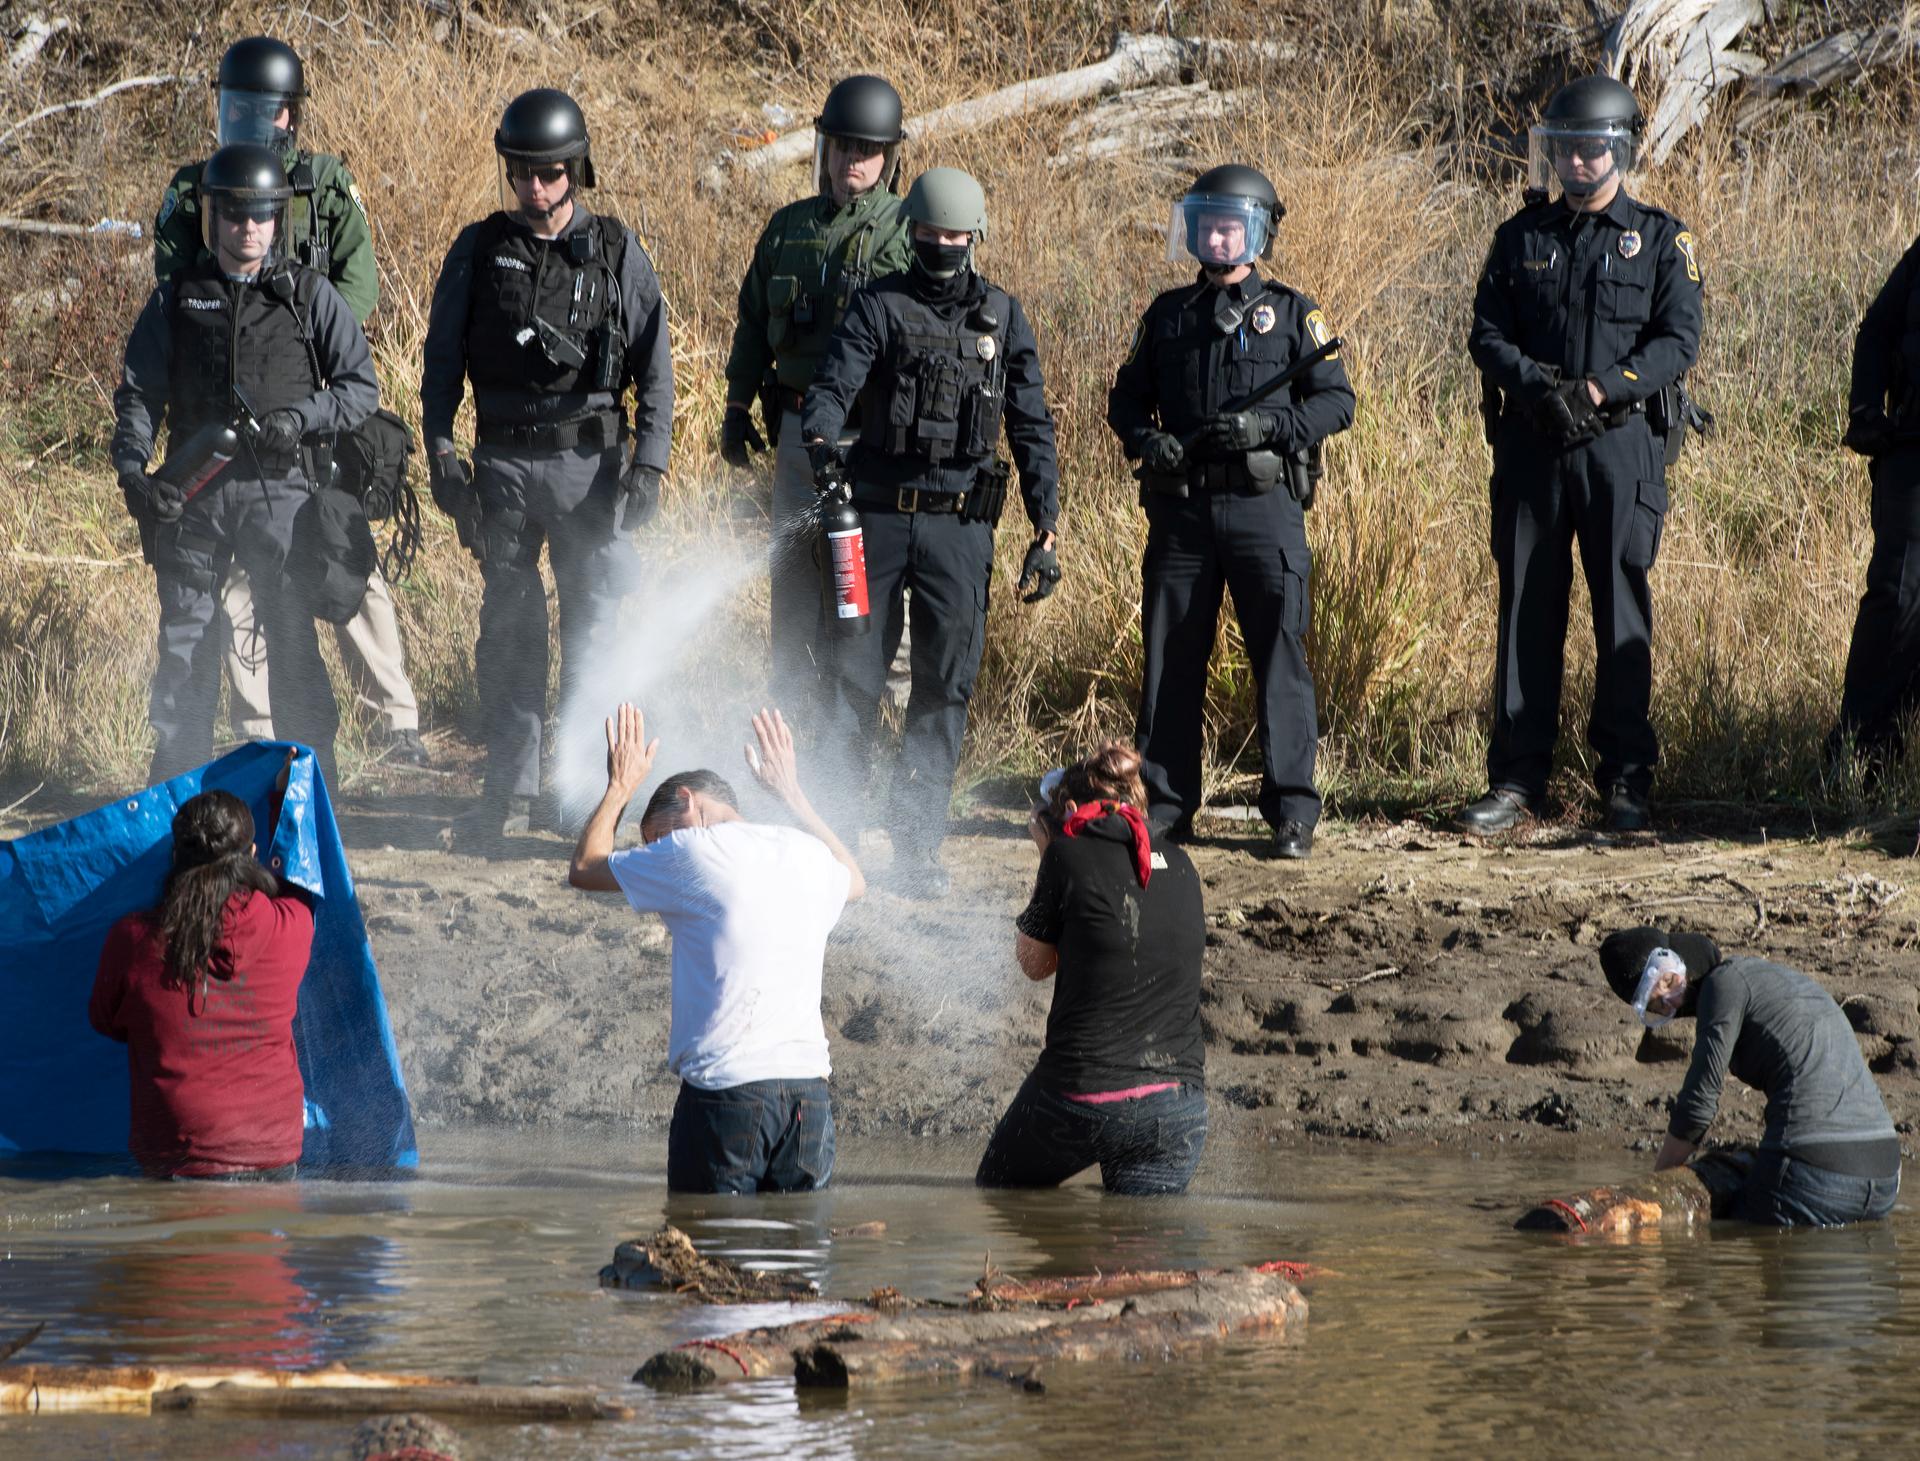 Police use pepper spray against protesters trying to cross a stream near an oil pipeline construction site near Standing Rock Indian Reservation, north of Cannon Ball, North Dakota, U.S. November 2, 2016.